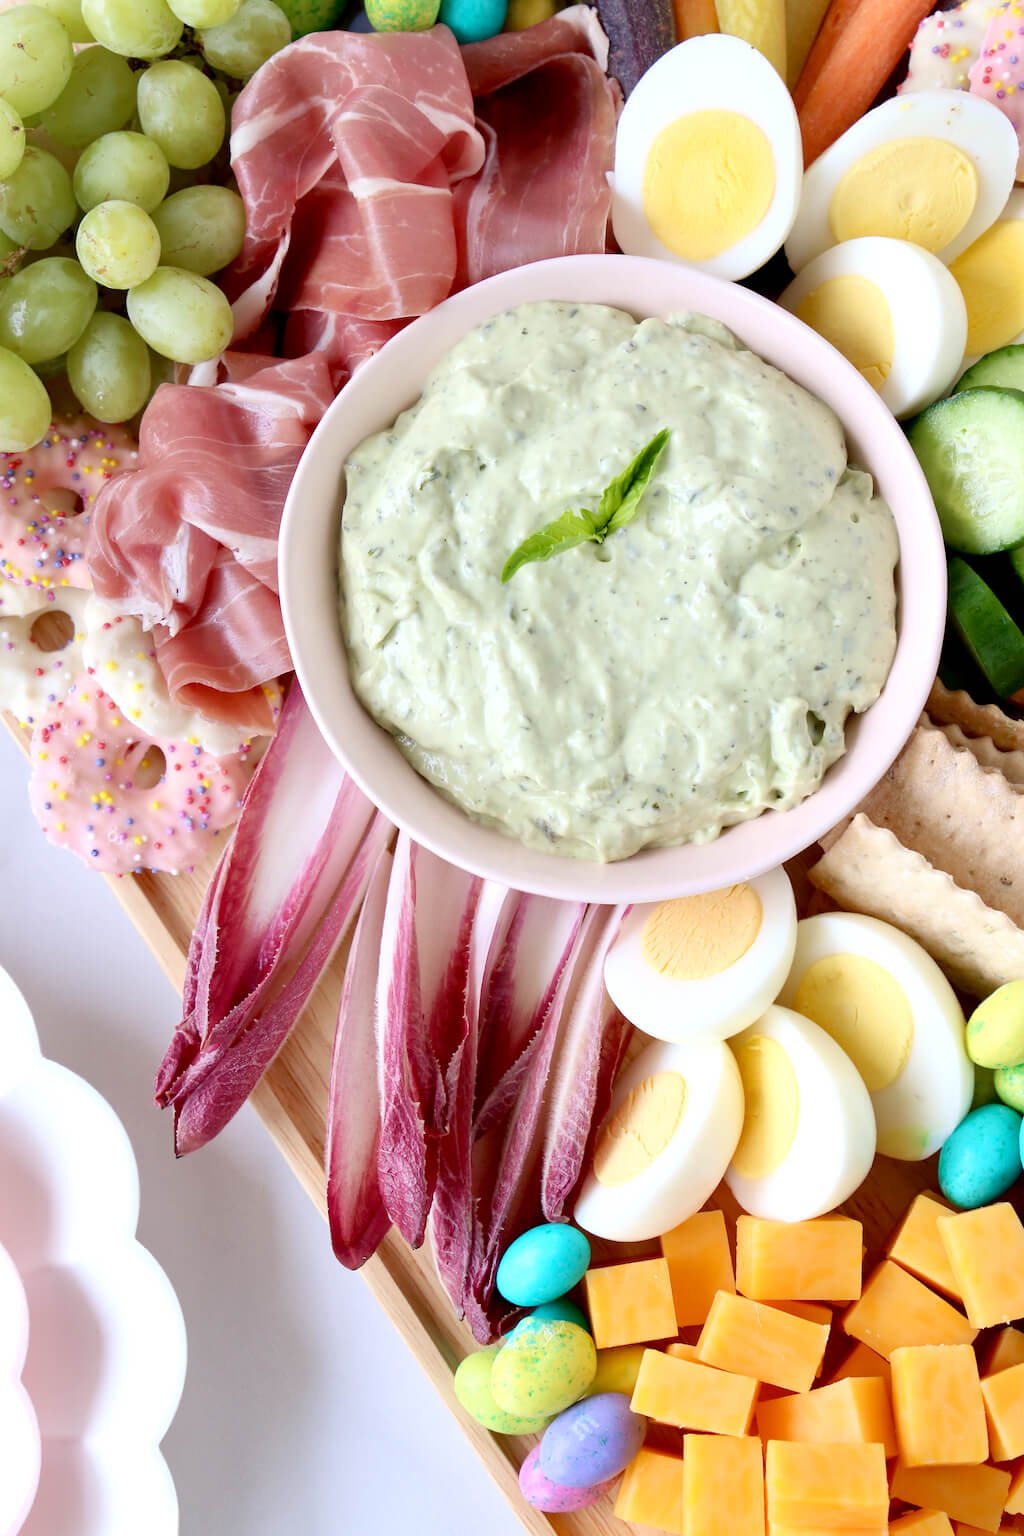 a platter of meats, cheeses, veggies and chocolate with a green dip 